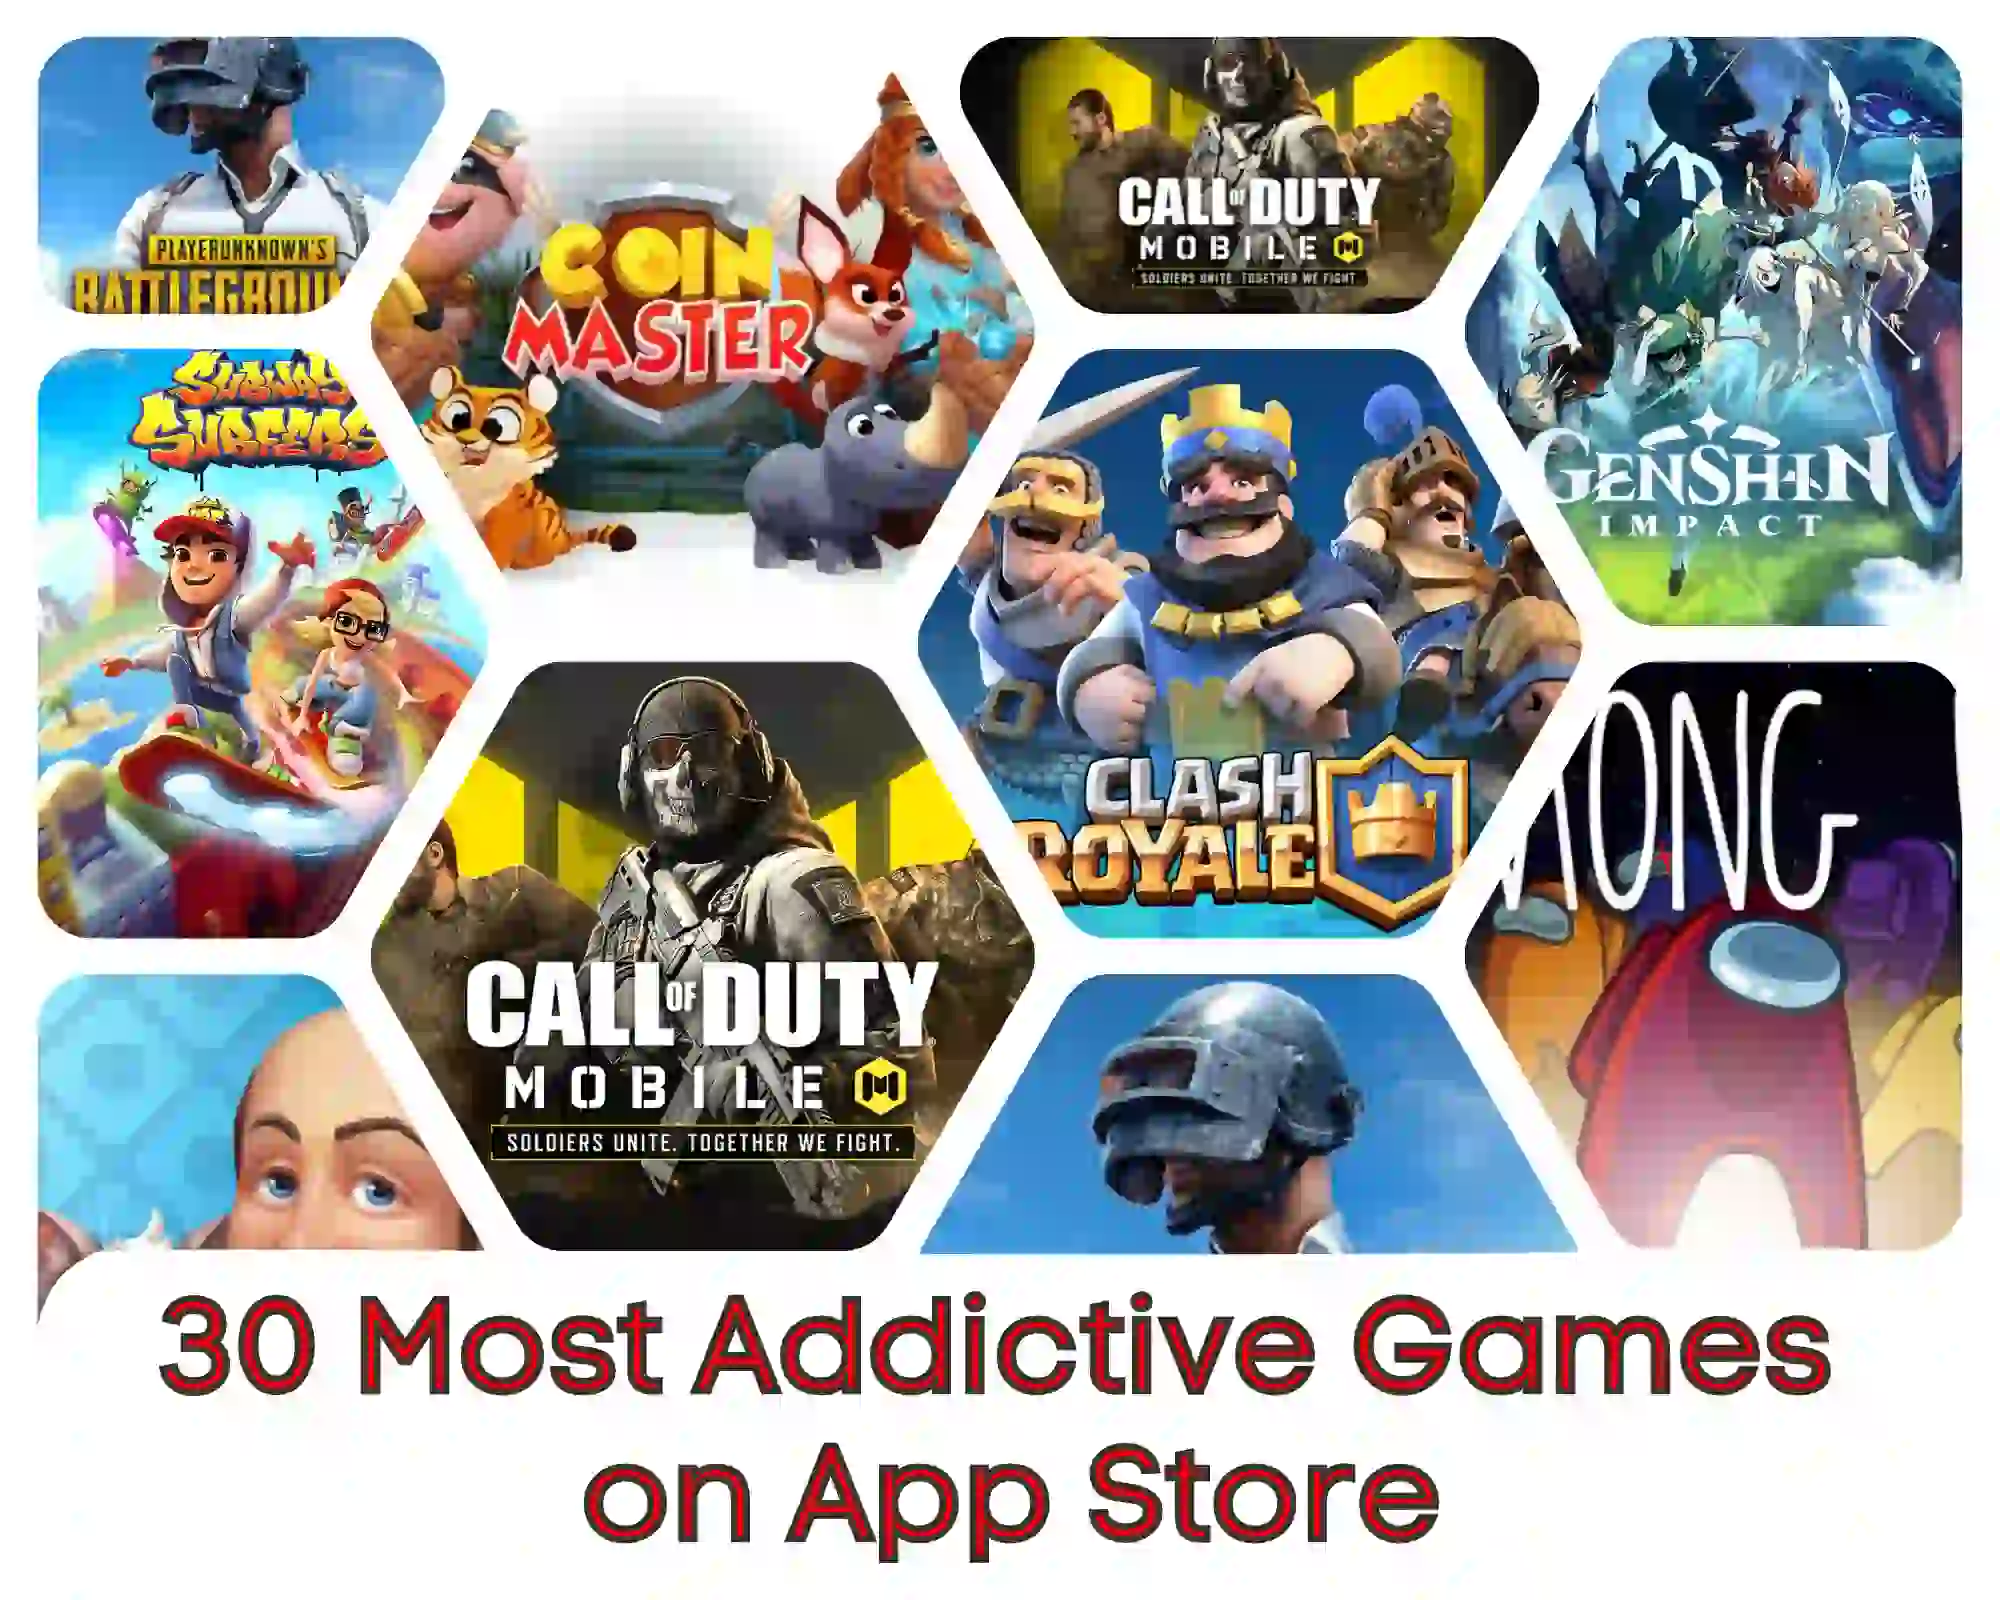 30 most addictive mobile games on App store